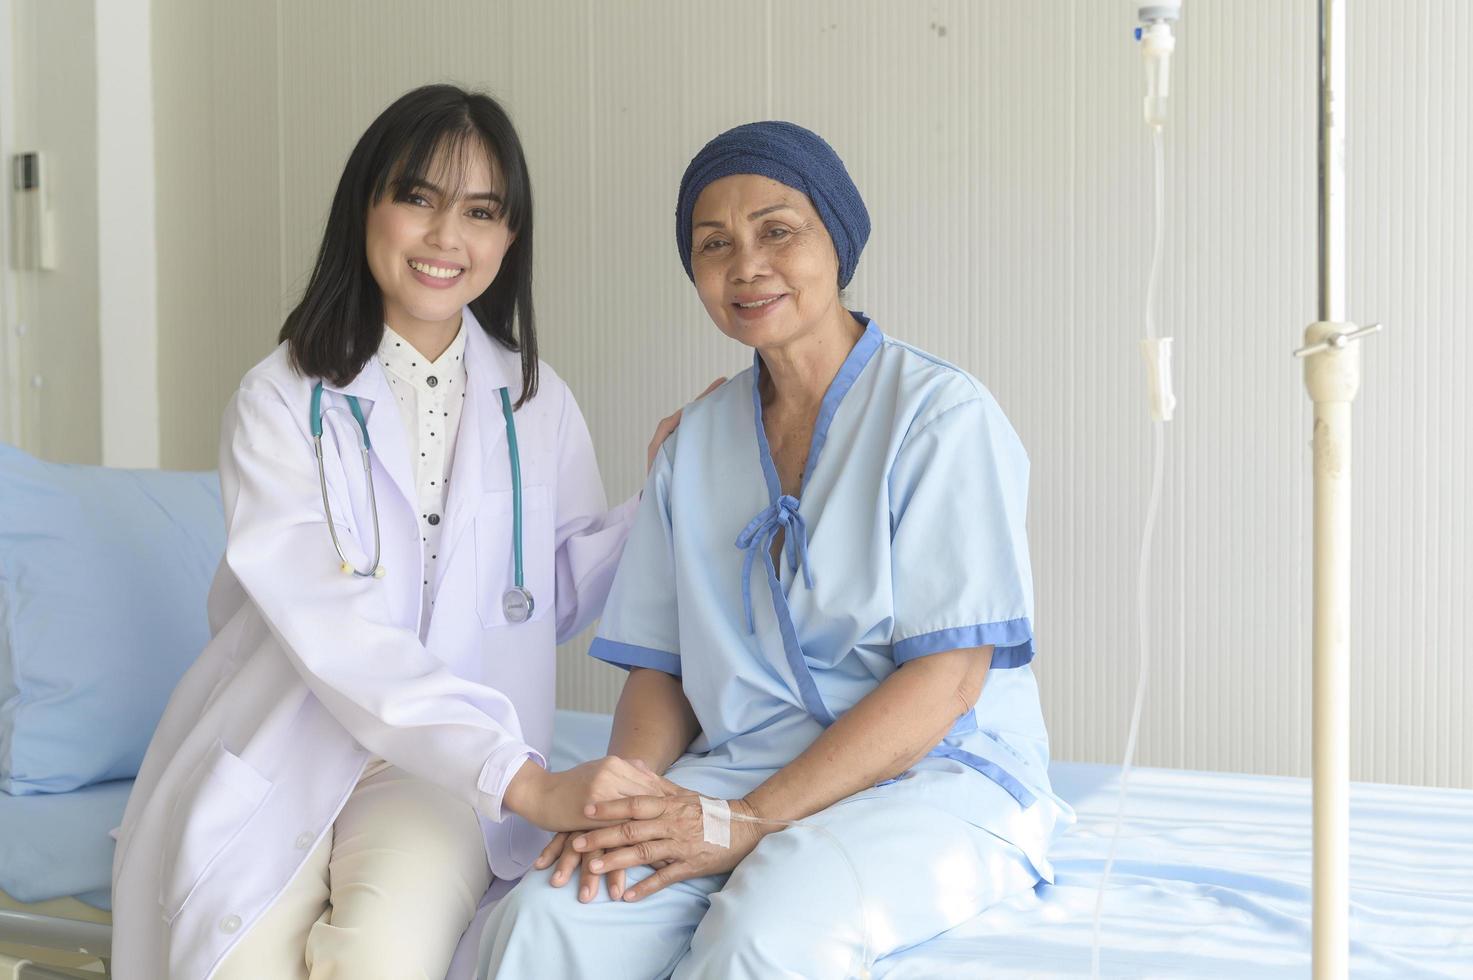 Doctor holding senior cancer patient's hand in hospital, health care and medical concept photo